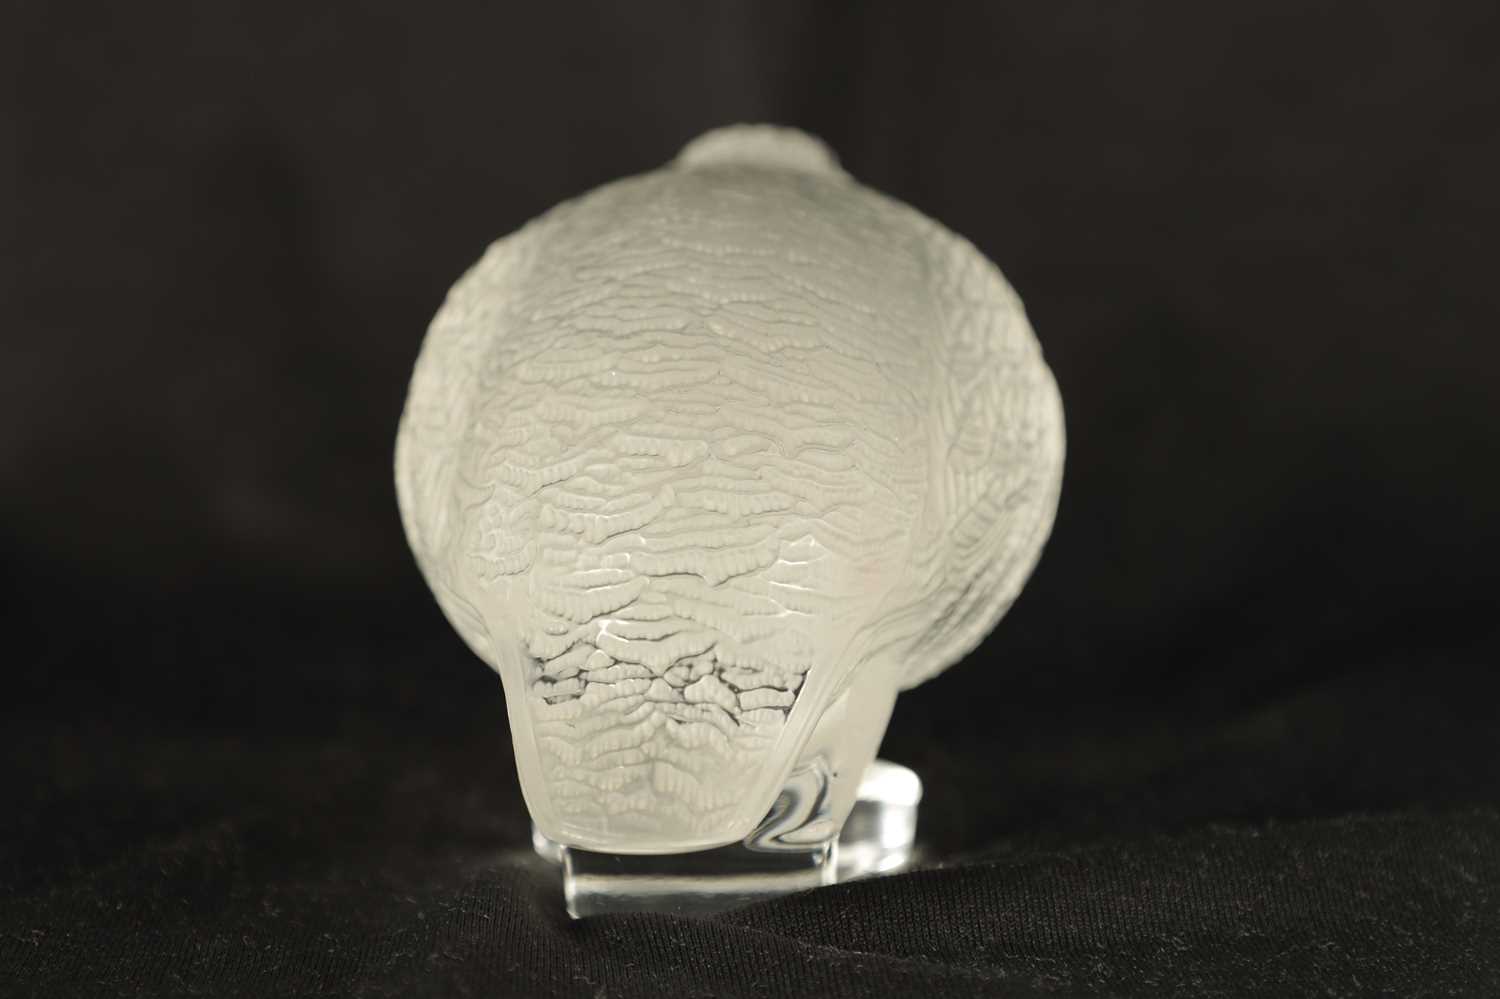 A LALIQUE FRANCE FROSTED GLASS BIRD SCULPTURE - Image 7 of 10